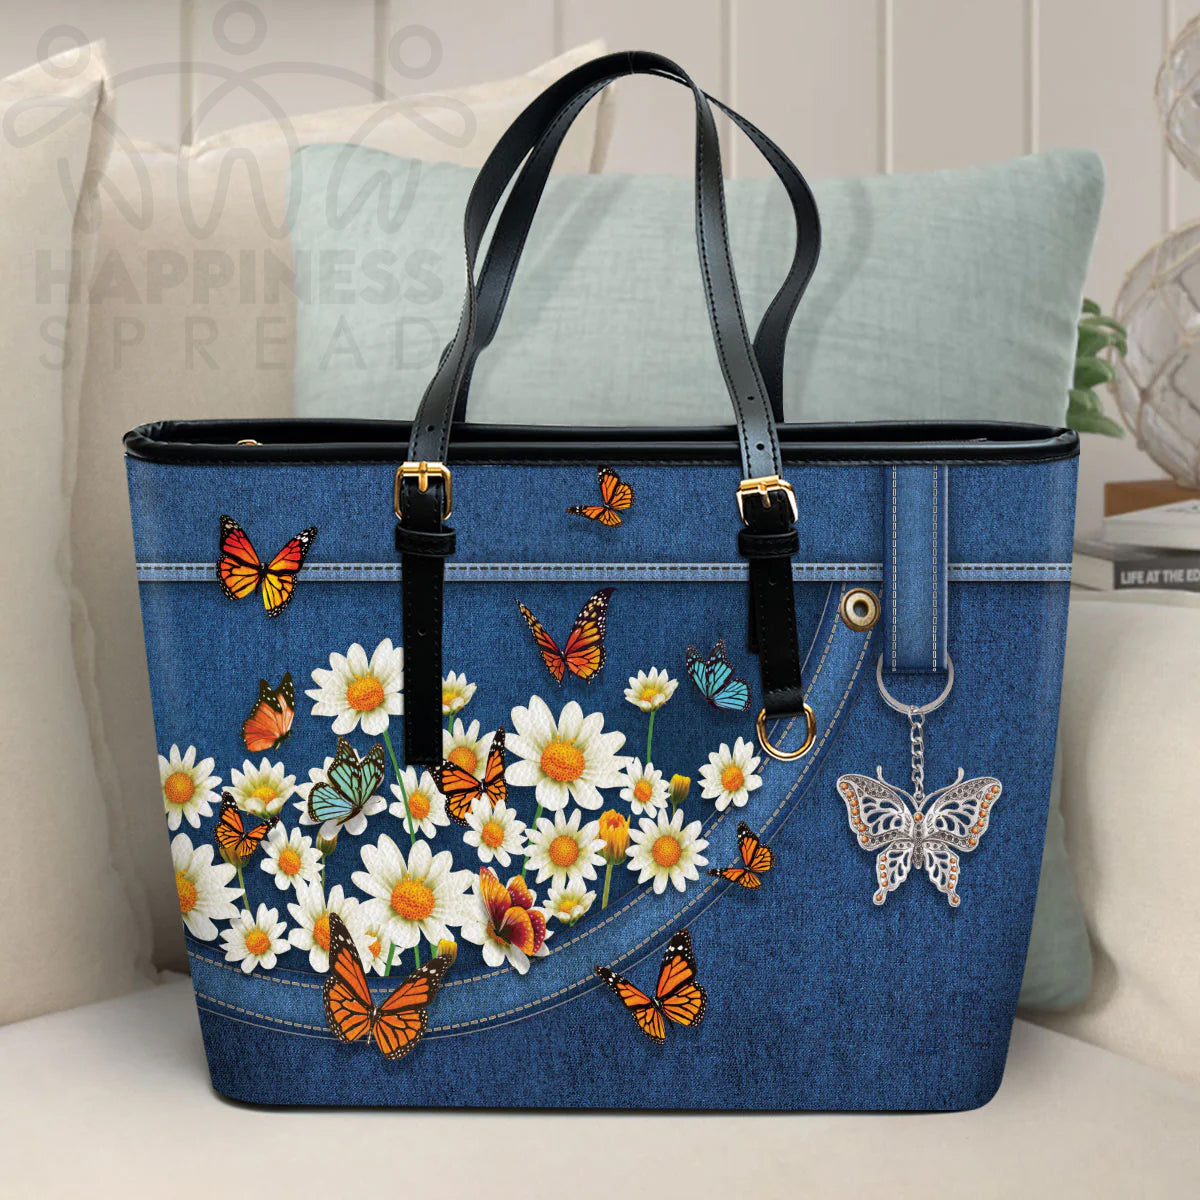 Christianart Handbag, Personalized Handbag, Daisy And Butterfly, Personalized Gifts, Gifts for Women. - Christian Art Bag